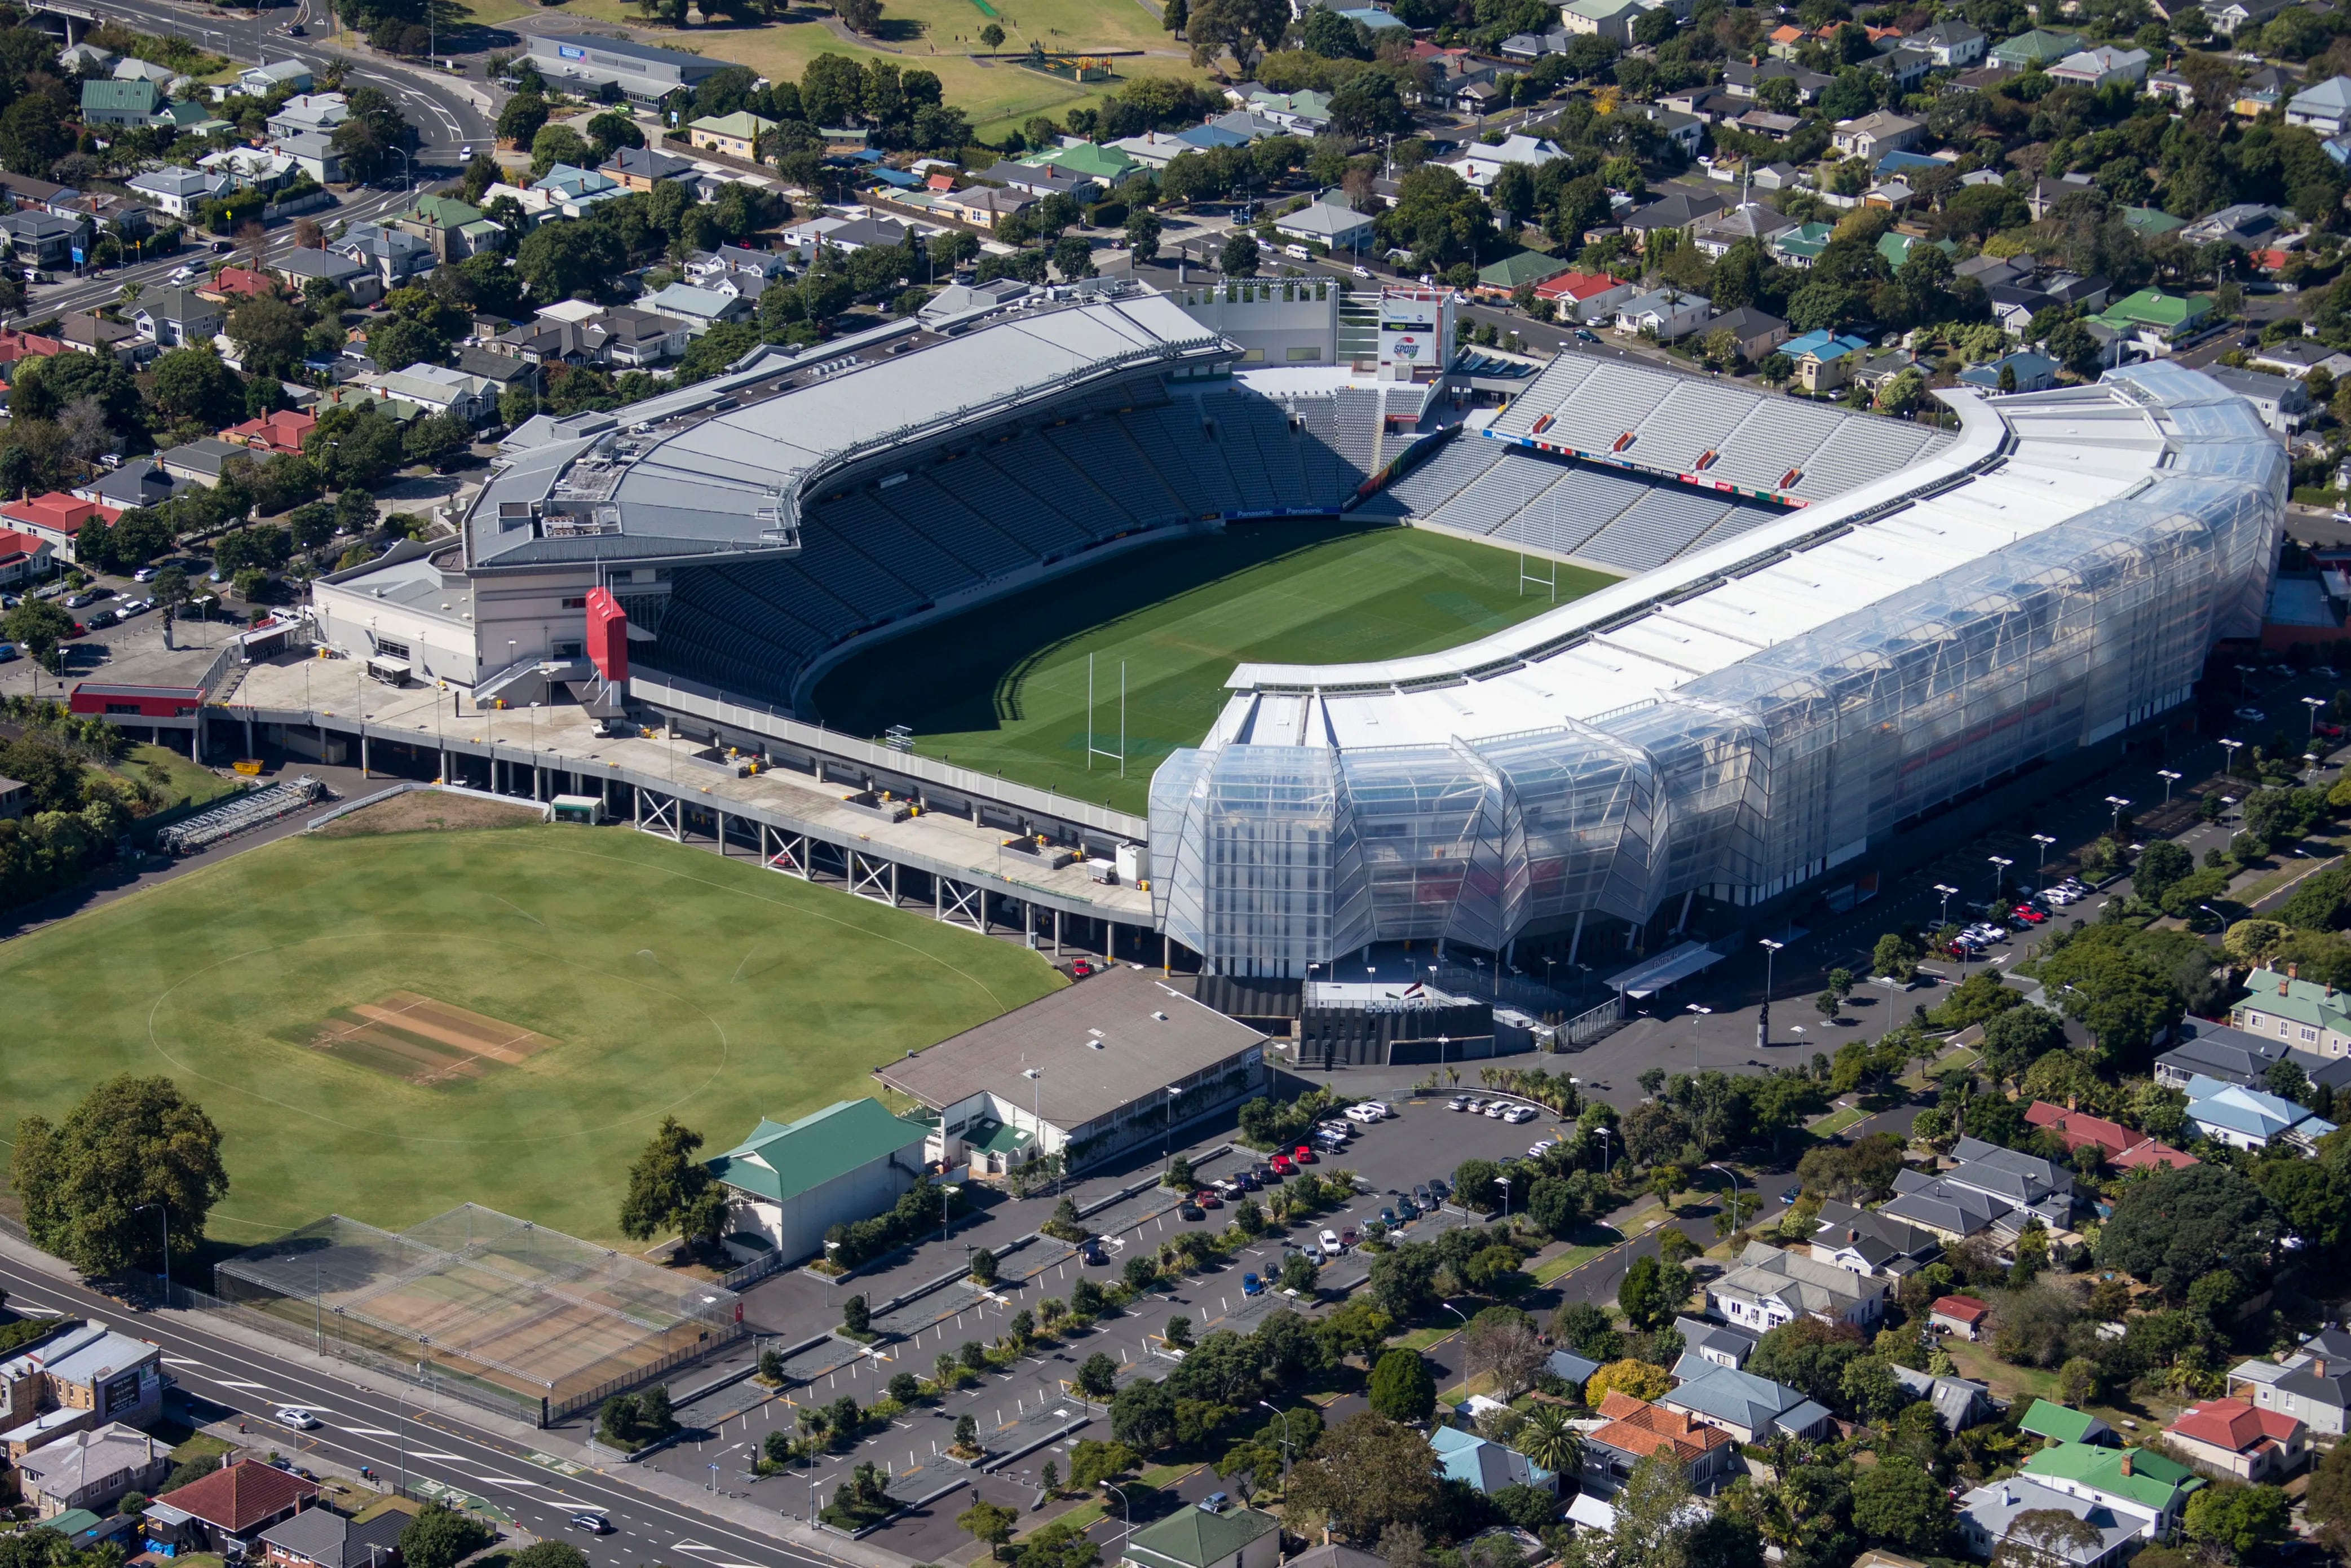 The U.S. will make its 2023 World Cup debut at Eden Park in Auckland, New Zealand.